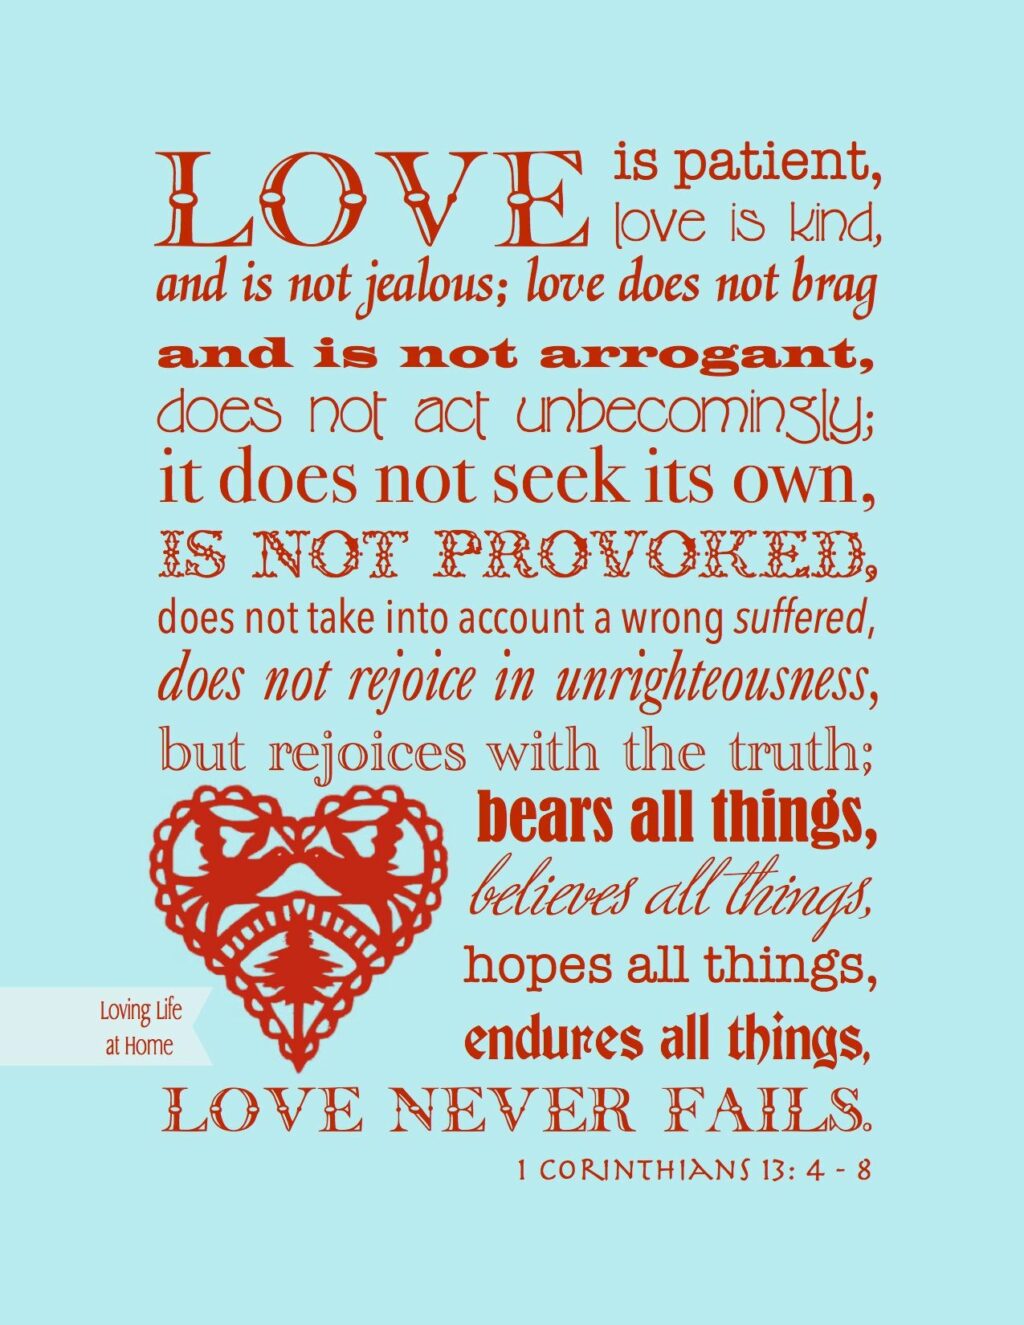 Free printable copy of 1 Corinthians 13 in a selection of different color schemes | www.flandersfamily.info